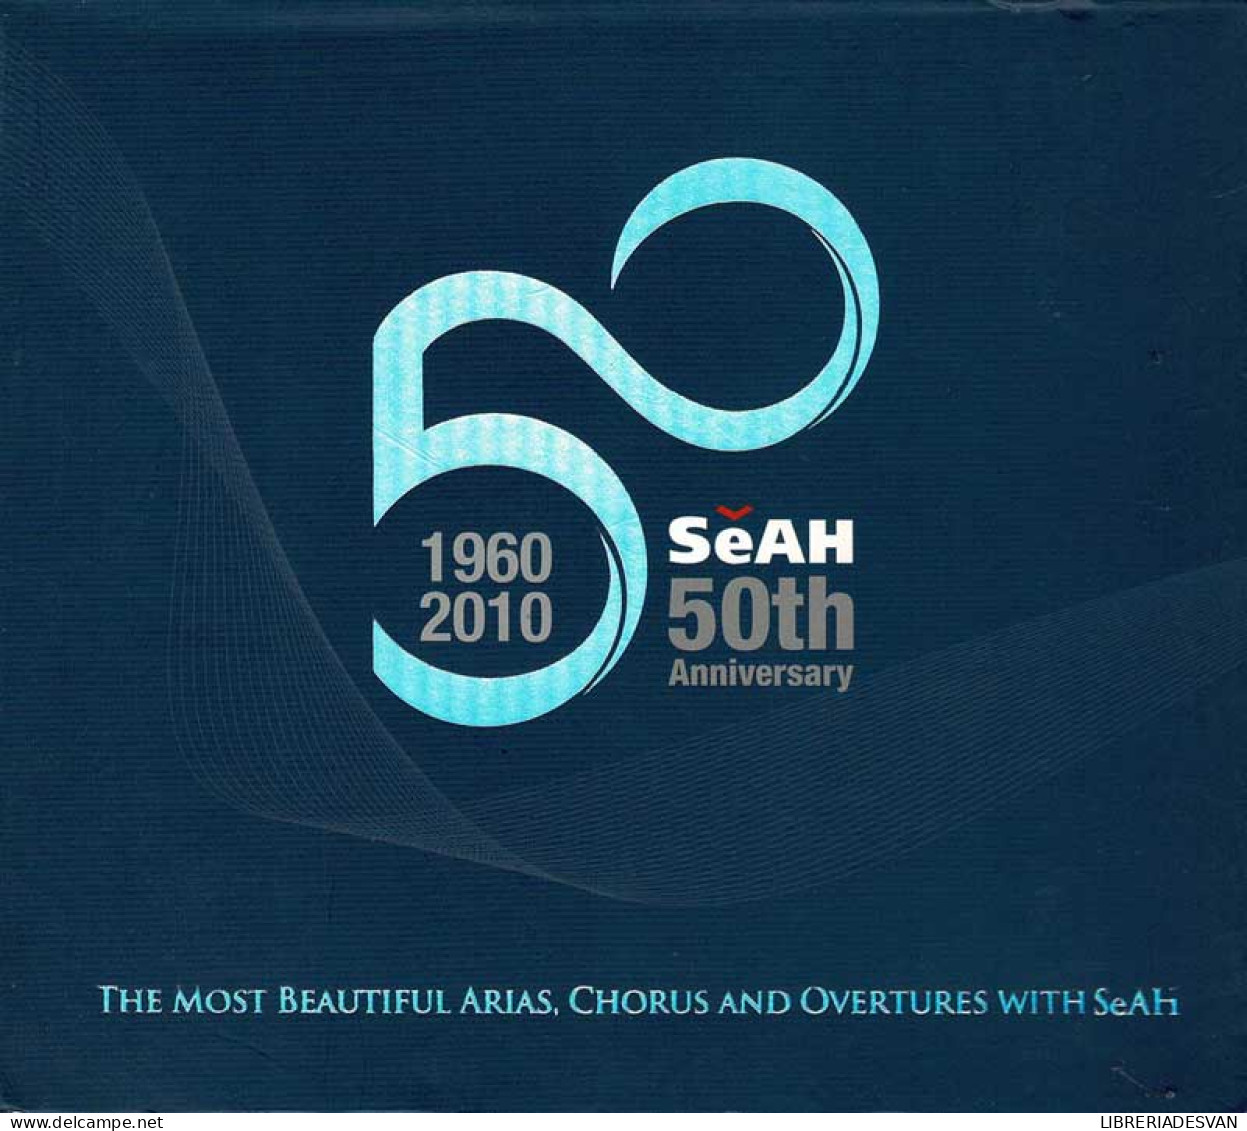 The Most Beautiful Arias. Chorus And Overtures With SeAh 50th Anniversary. 2 X CD - Classical